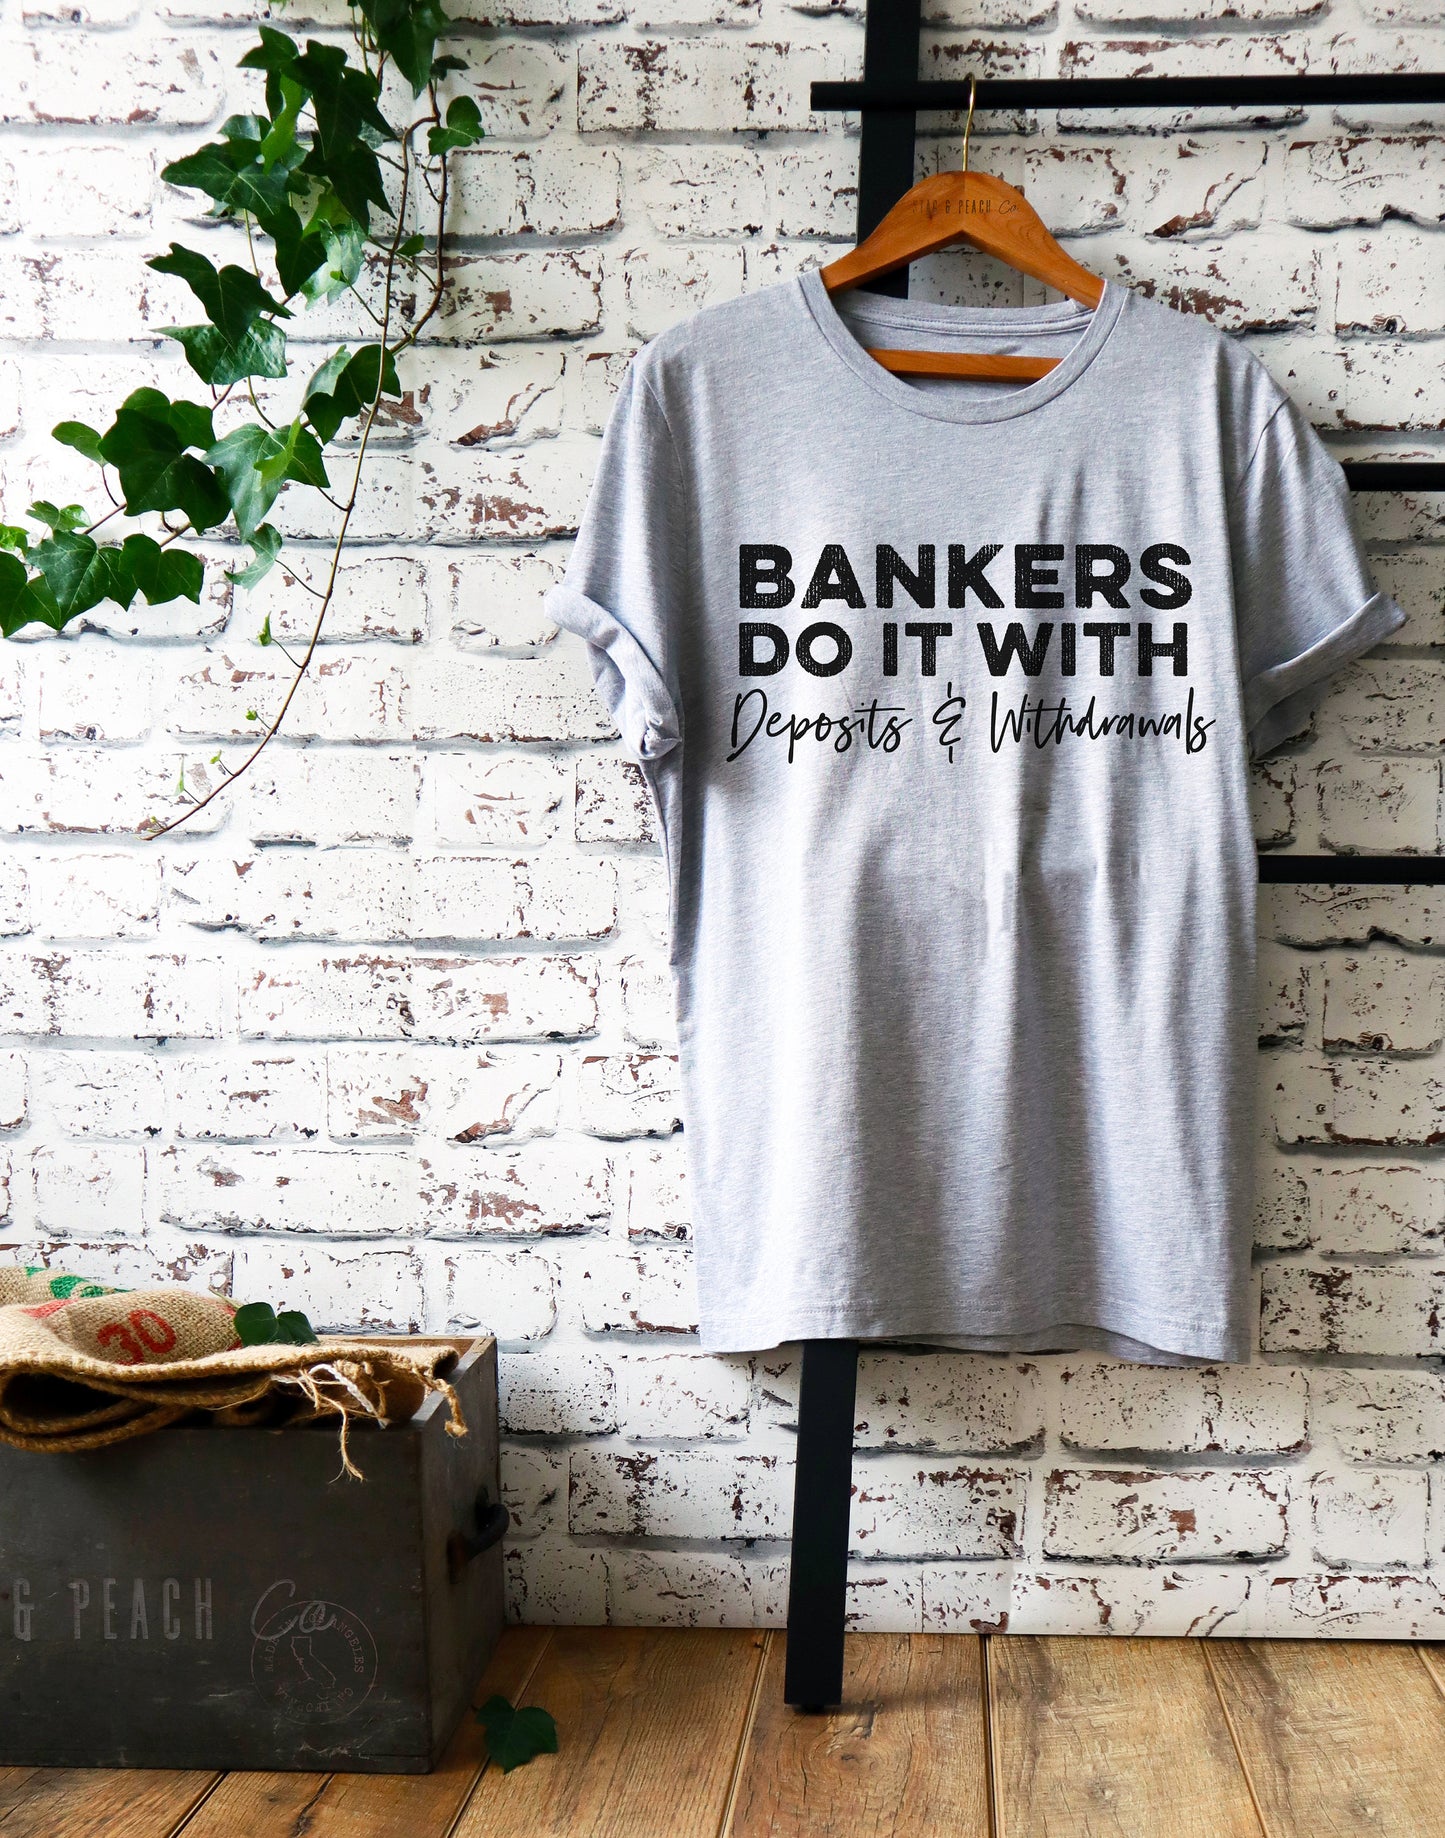 Bankers Do It With Deposits And Withdrawals Unisex Shirt - Banker Shirt, Banker Gift, Banking Shirt, Banking Gift, Coworker Gift